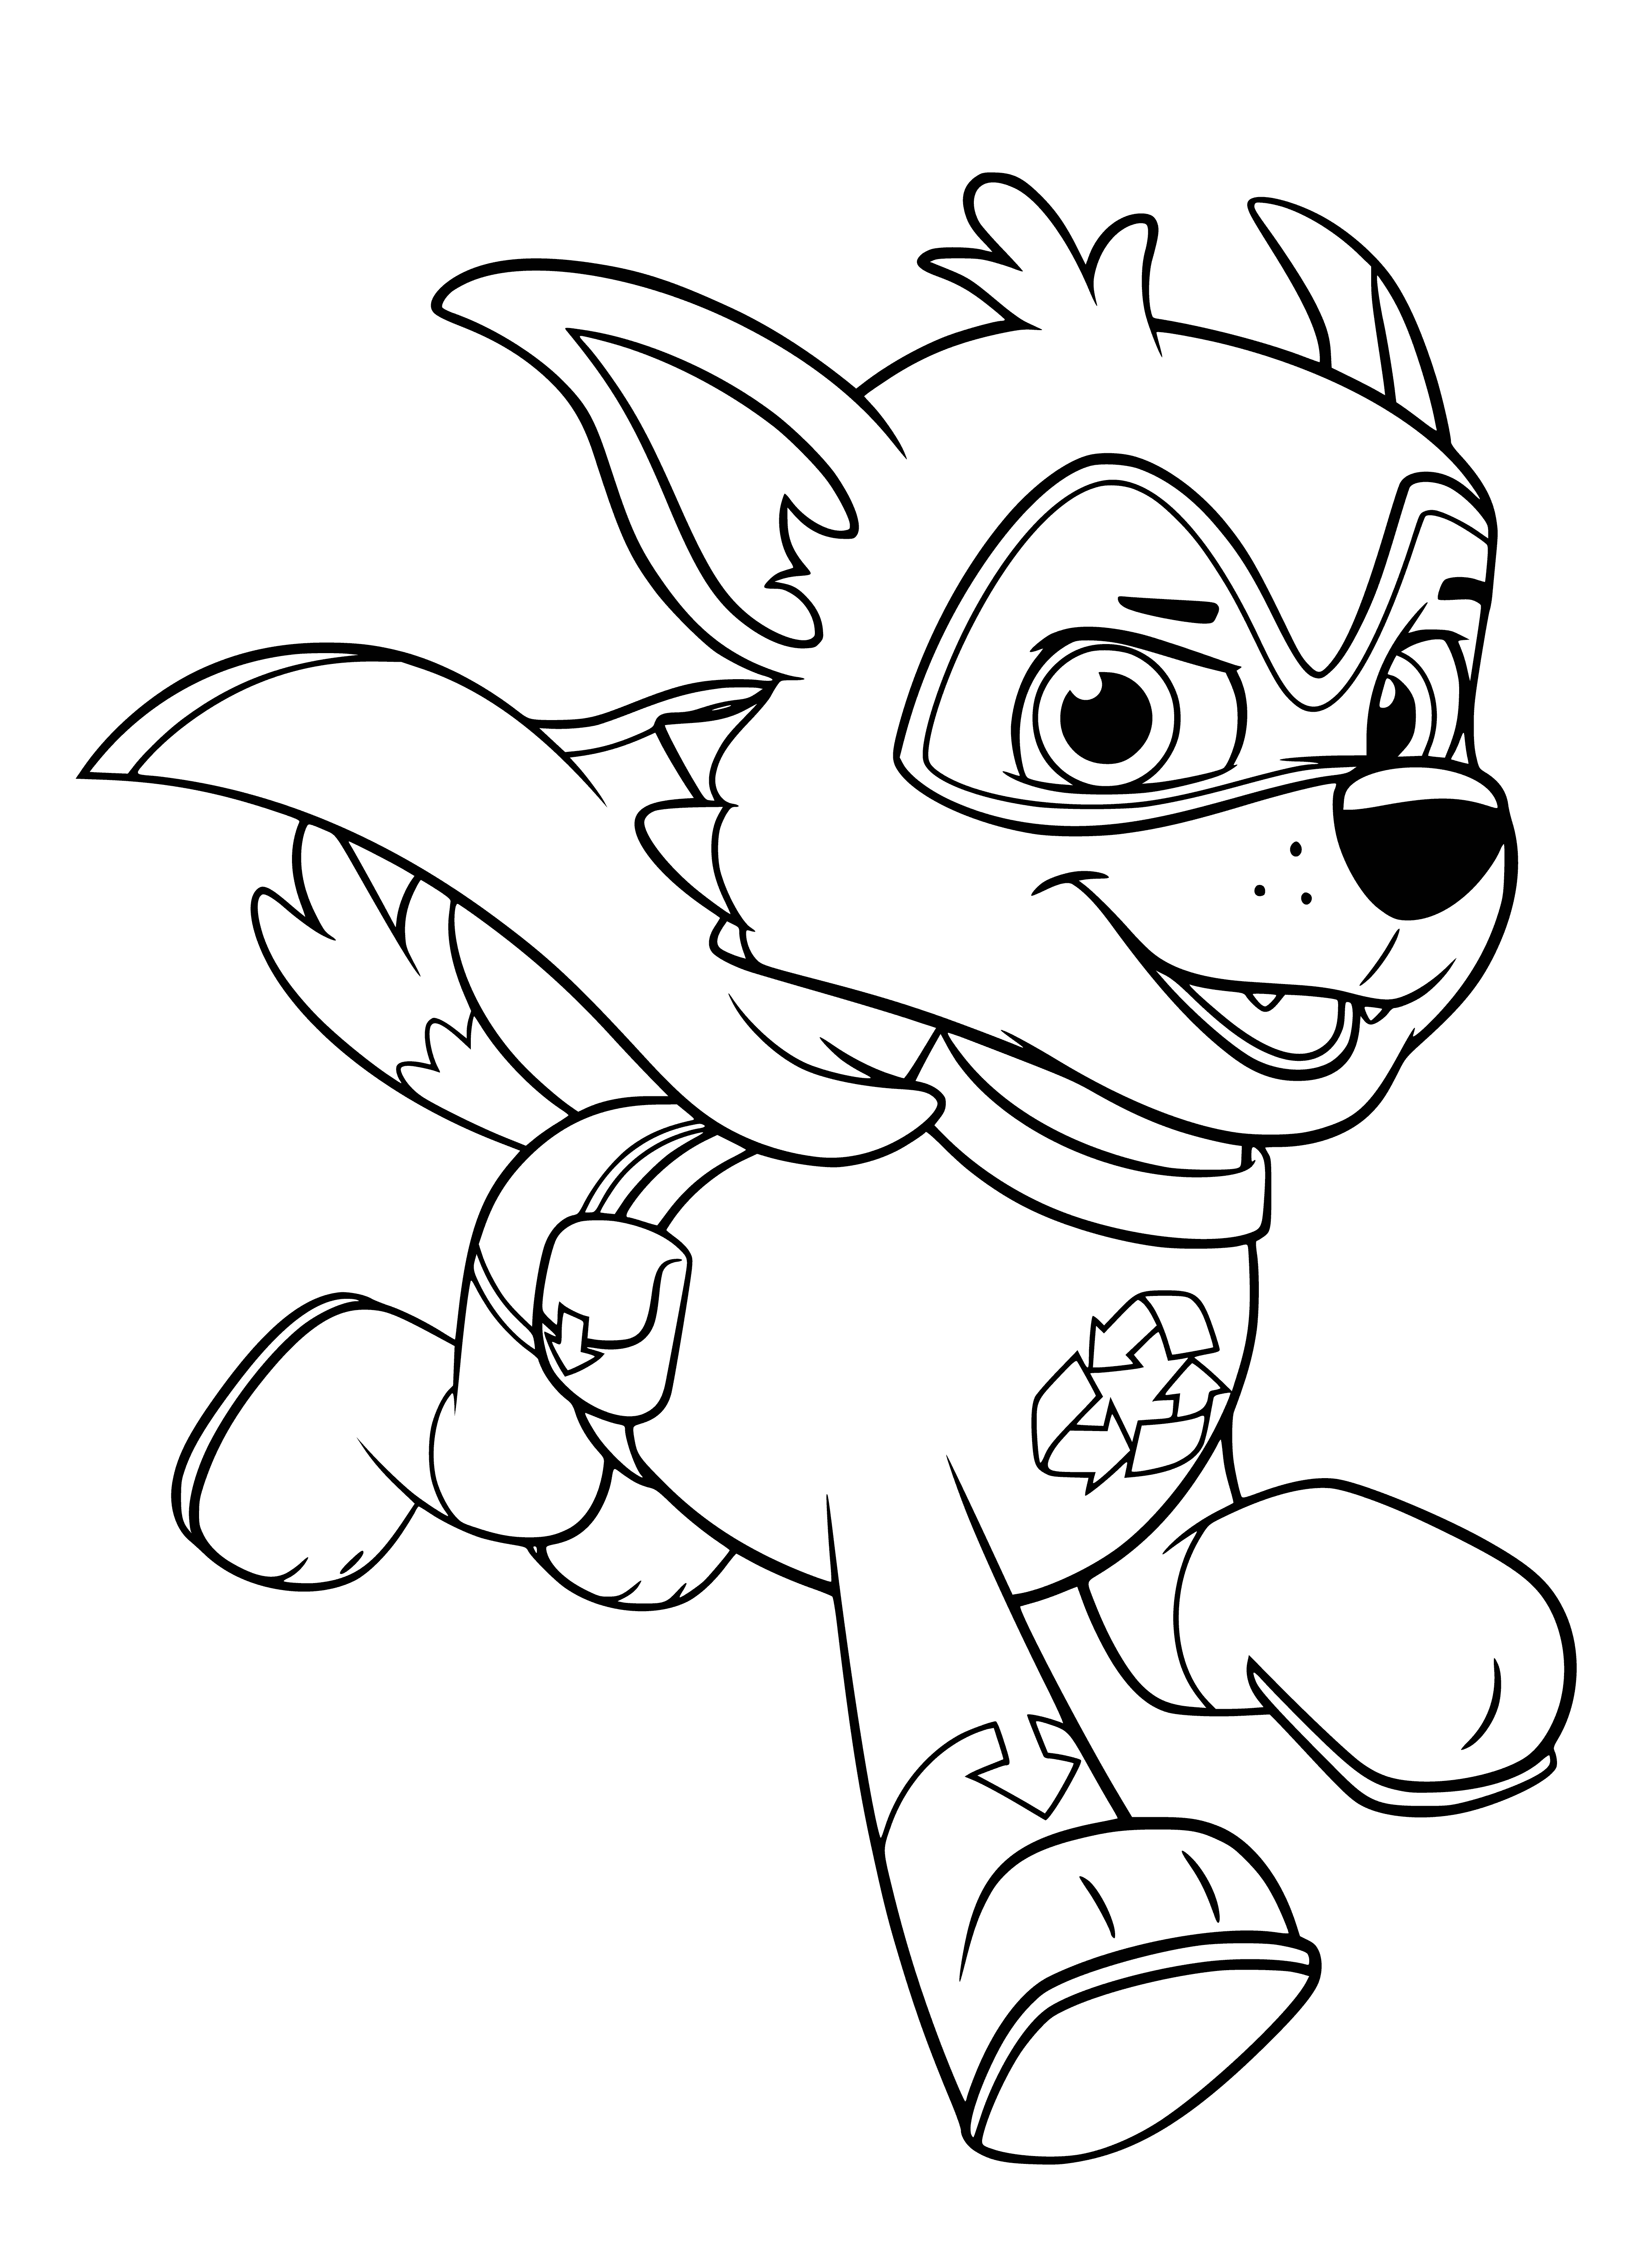 coloring page: Cartoon dog Rocky wears a dark blue uniform & tool belt in a mountainous setting. He holds a hammer in one hand & a Paw Patrol logo on a yellow badge. #pawpatrol